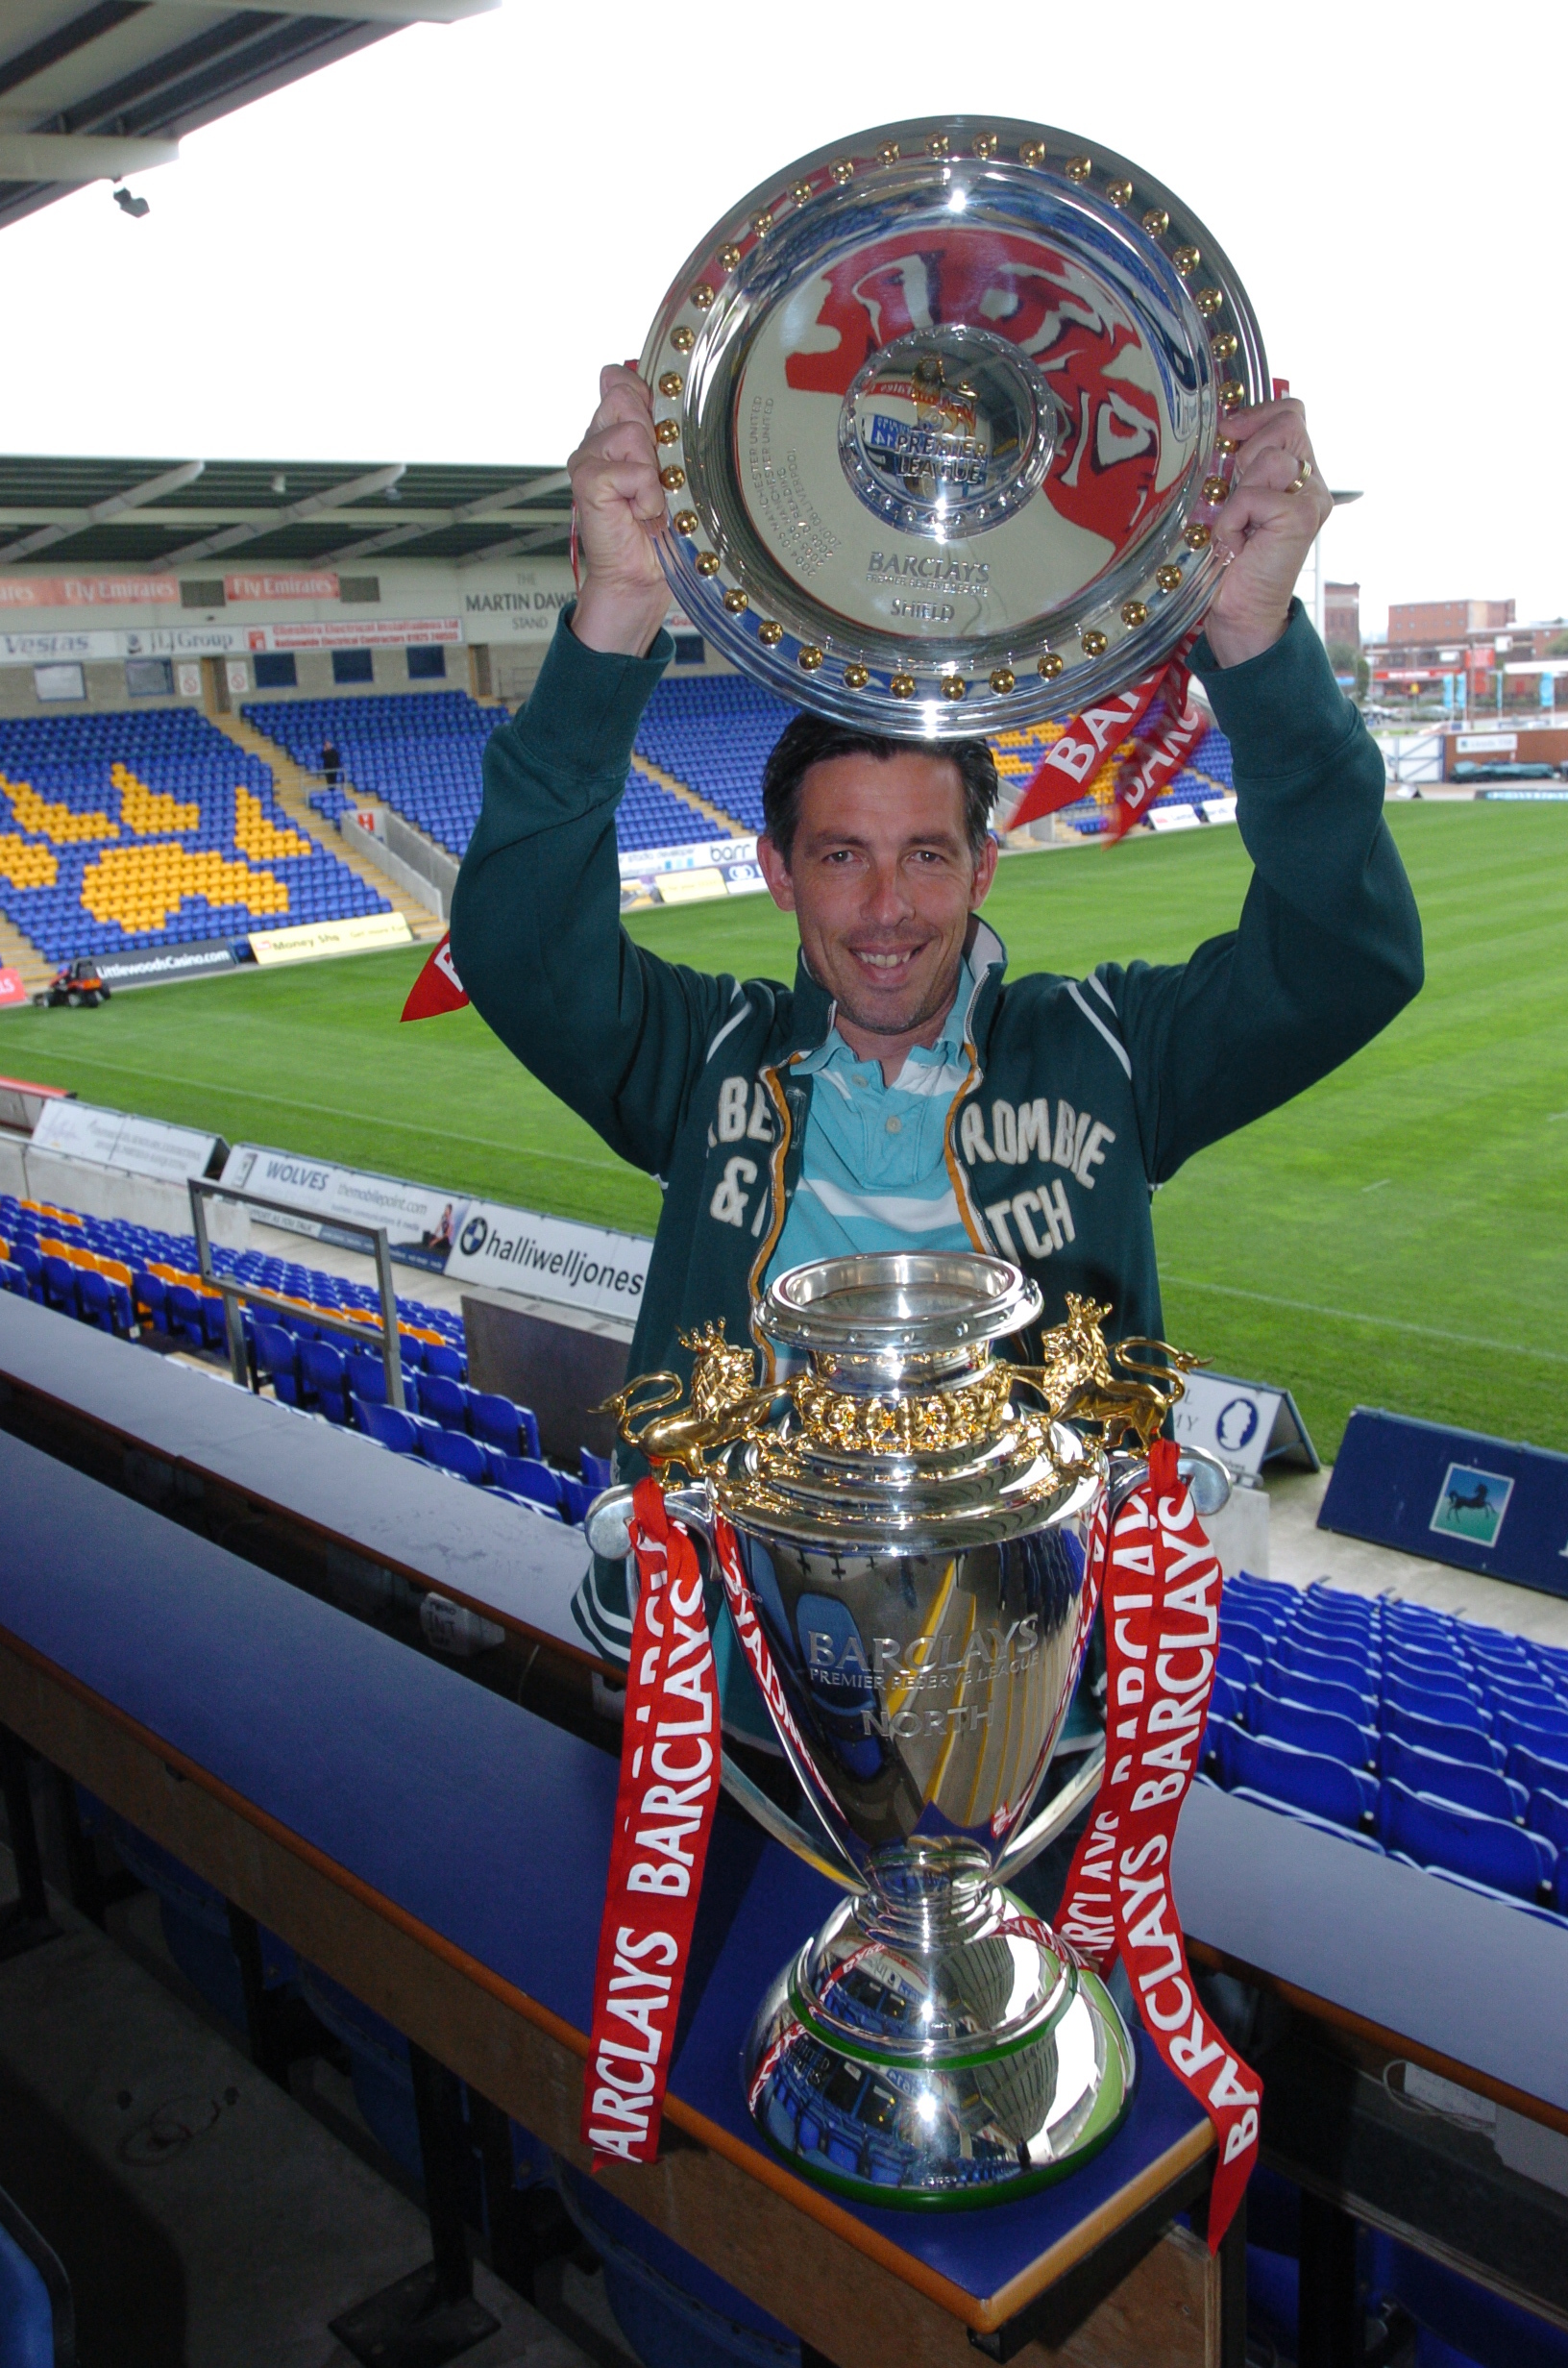 2008: Liverpool Reserves manager Gary Ablett celebrates a championship-winning league campaign played at The Halliwell Jones Stadium